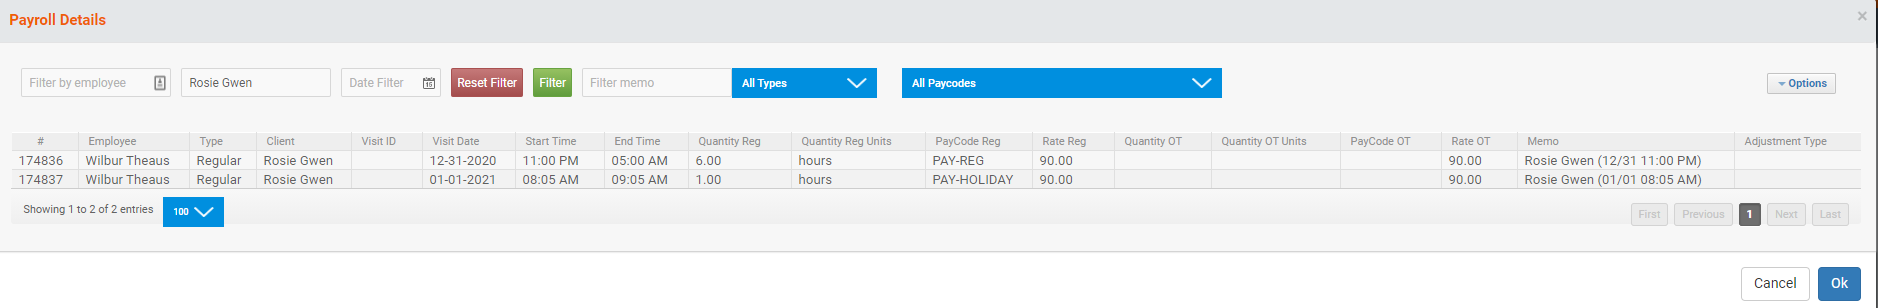 payroll_details_holiday_and_regular.png